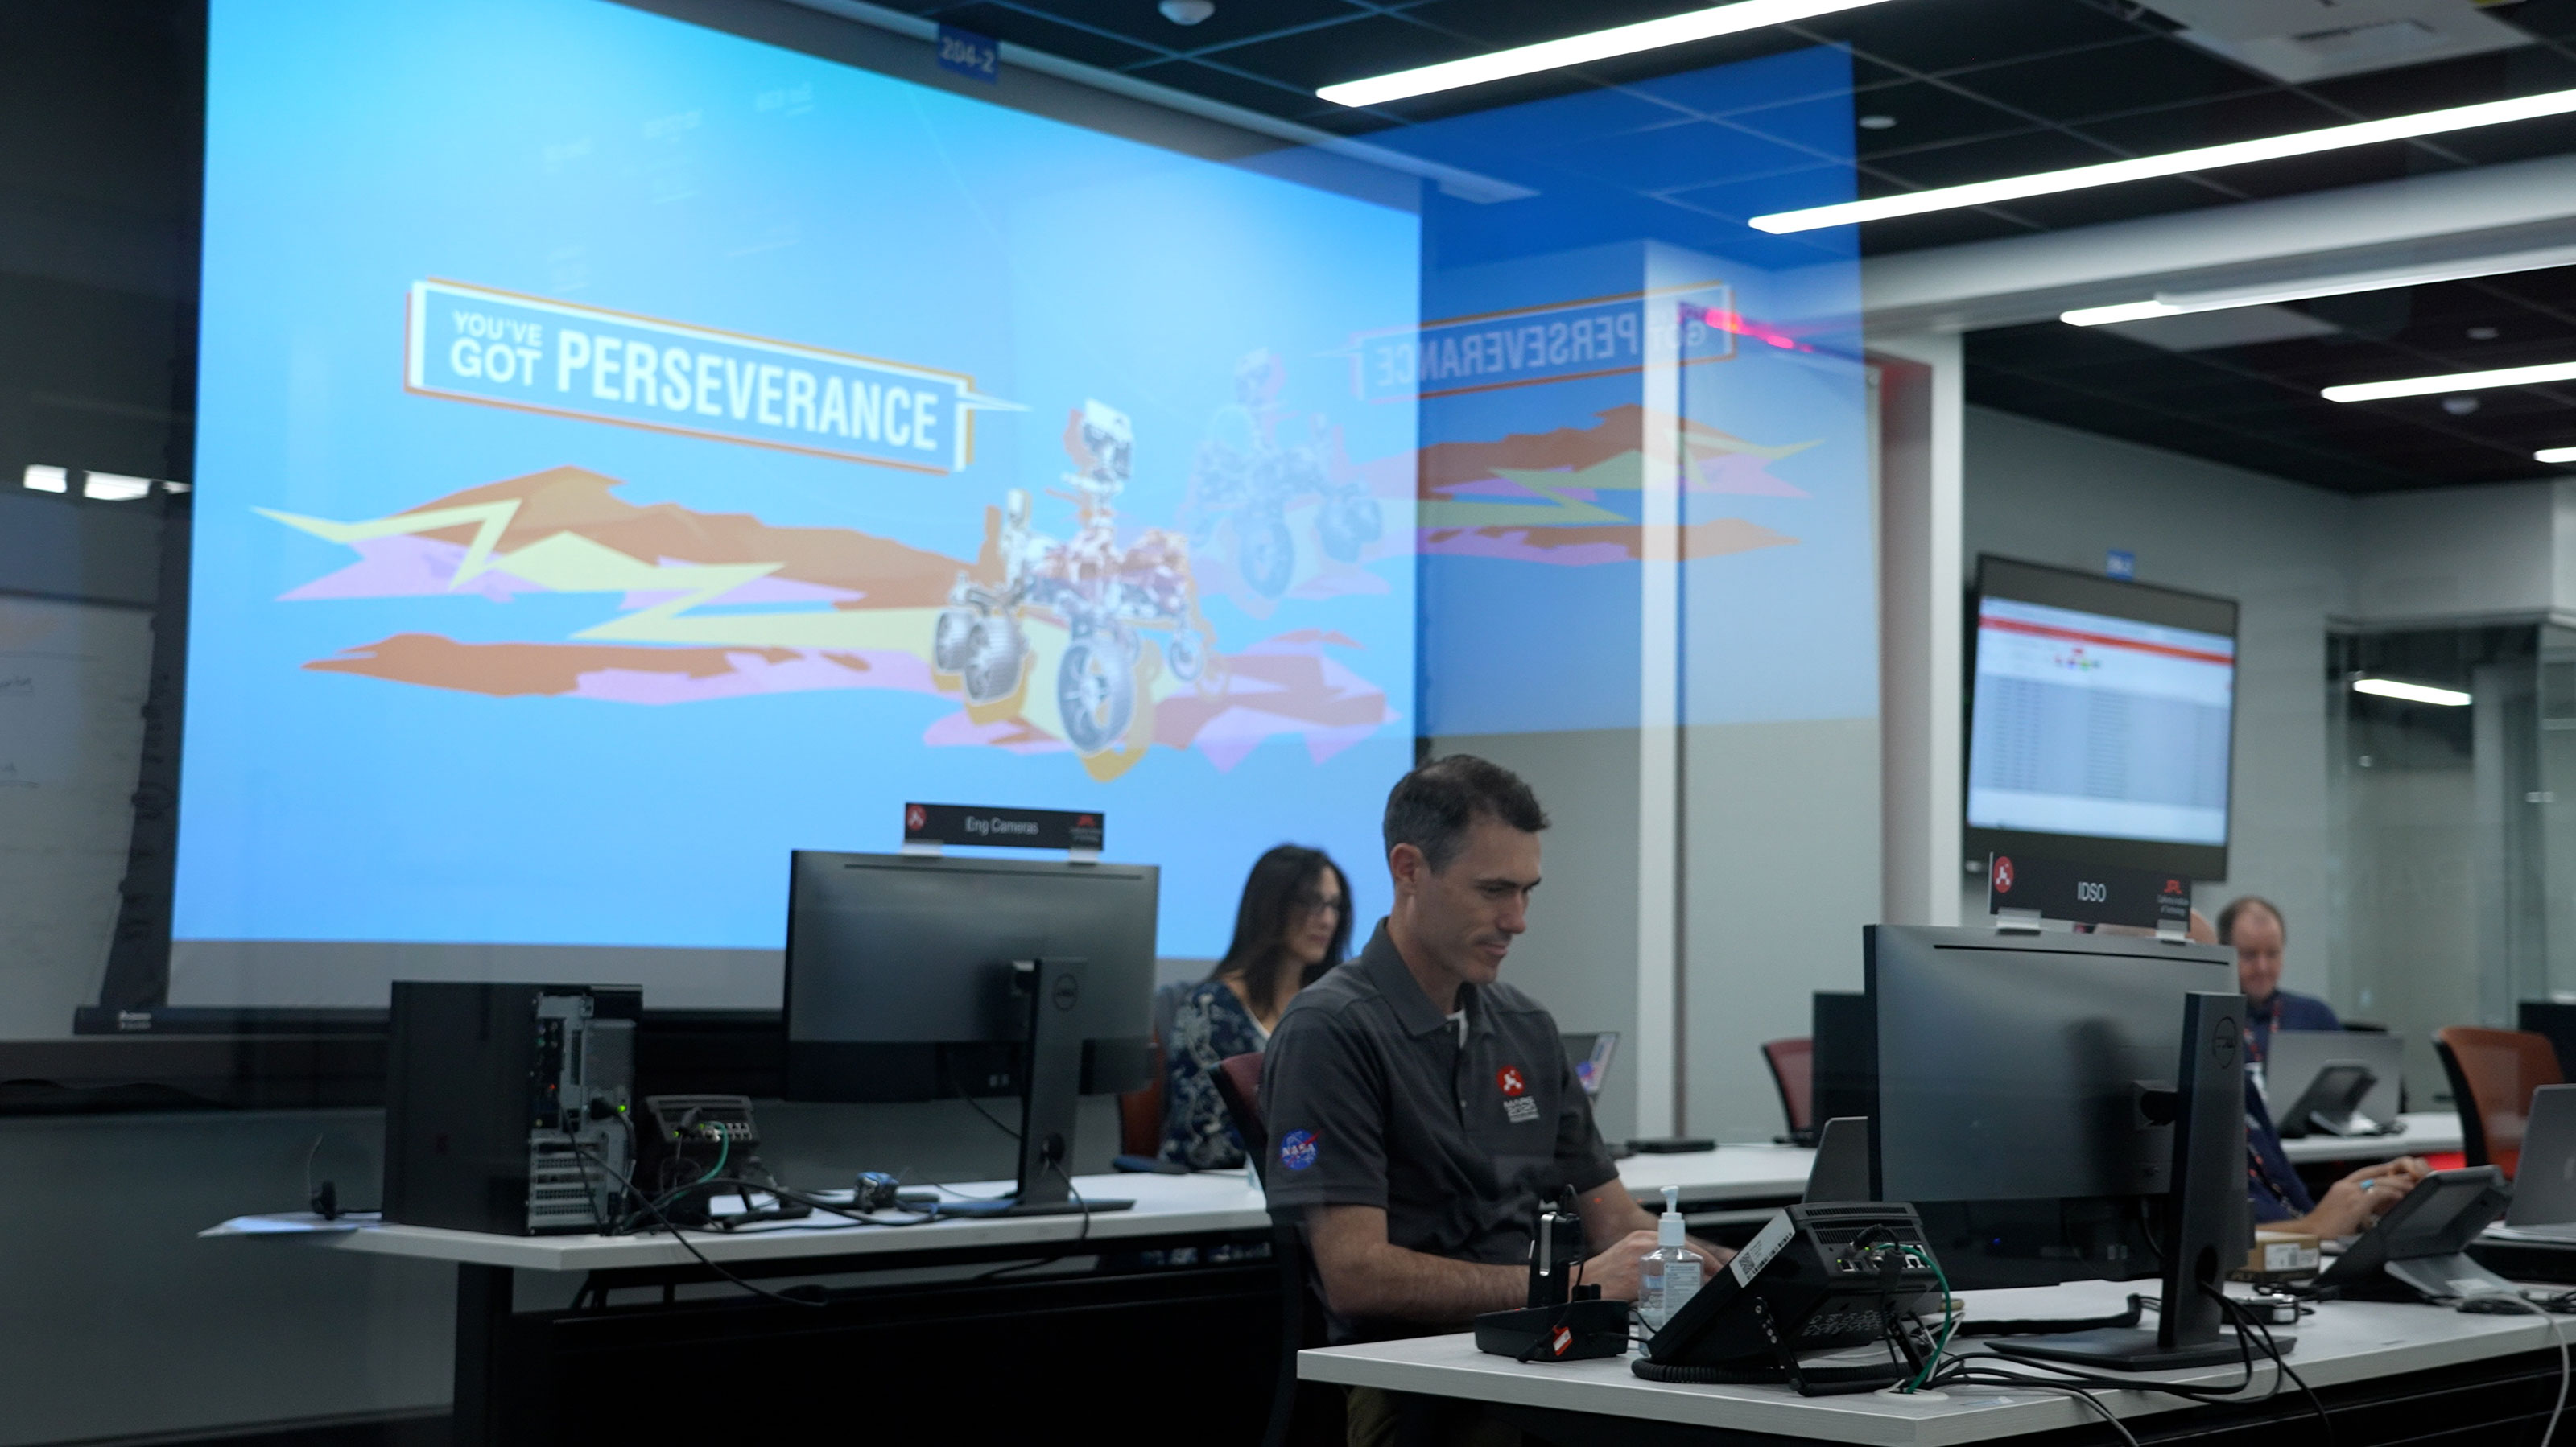 Image inside the control room for NASA's Perseverance rover shows the multi-colored "You've Got Perseverance" logo and illustration of the rover on one large screen on the wall, with two rows of tables and computers in front, with several Mars team members interacting virtually with student honorees.